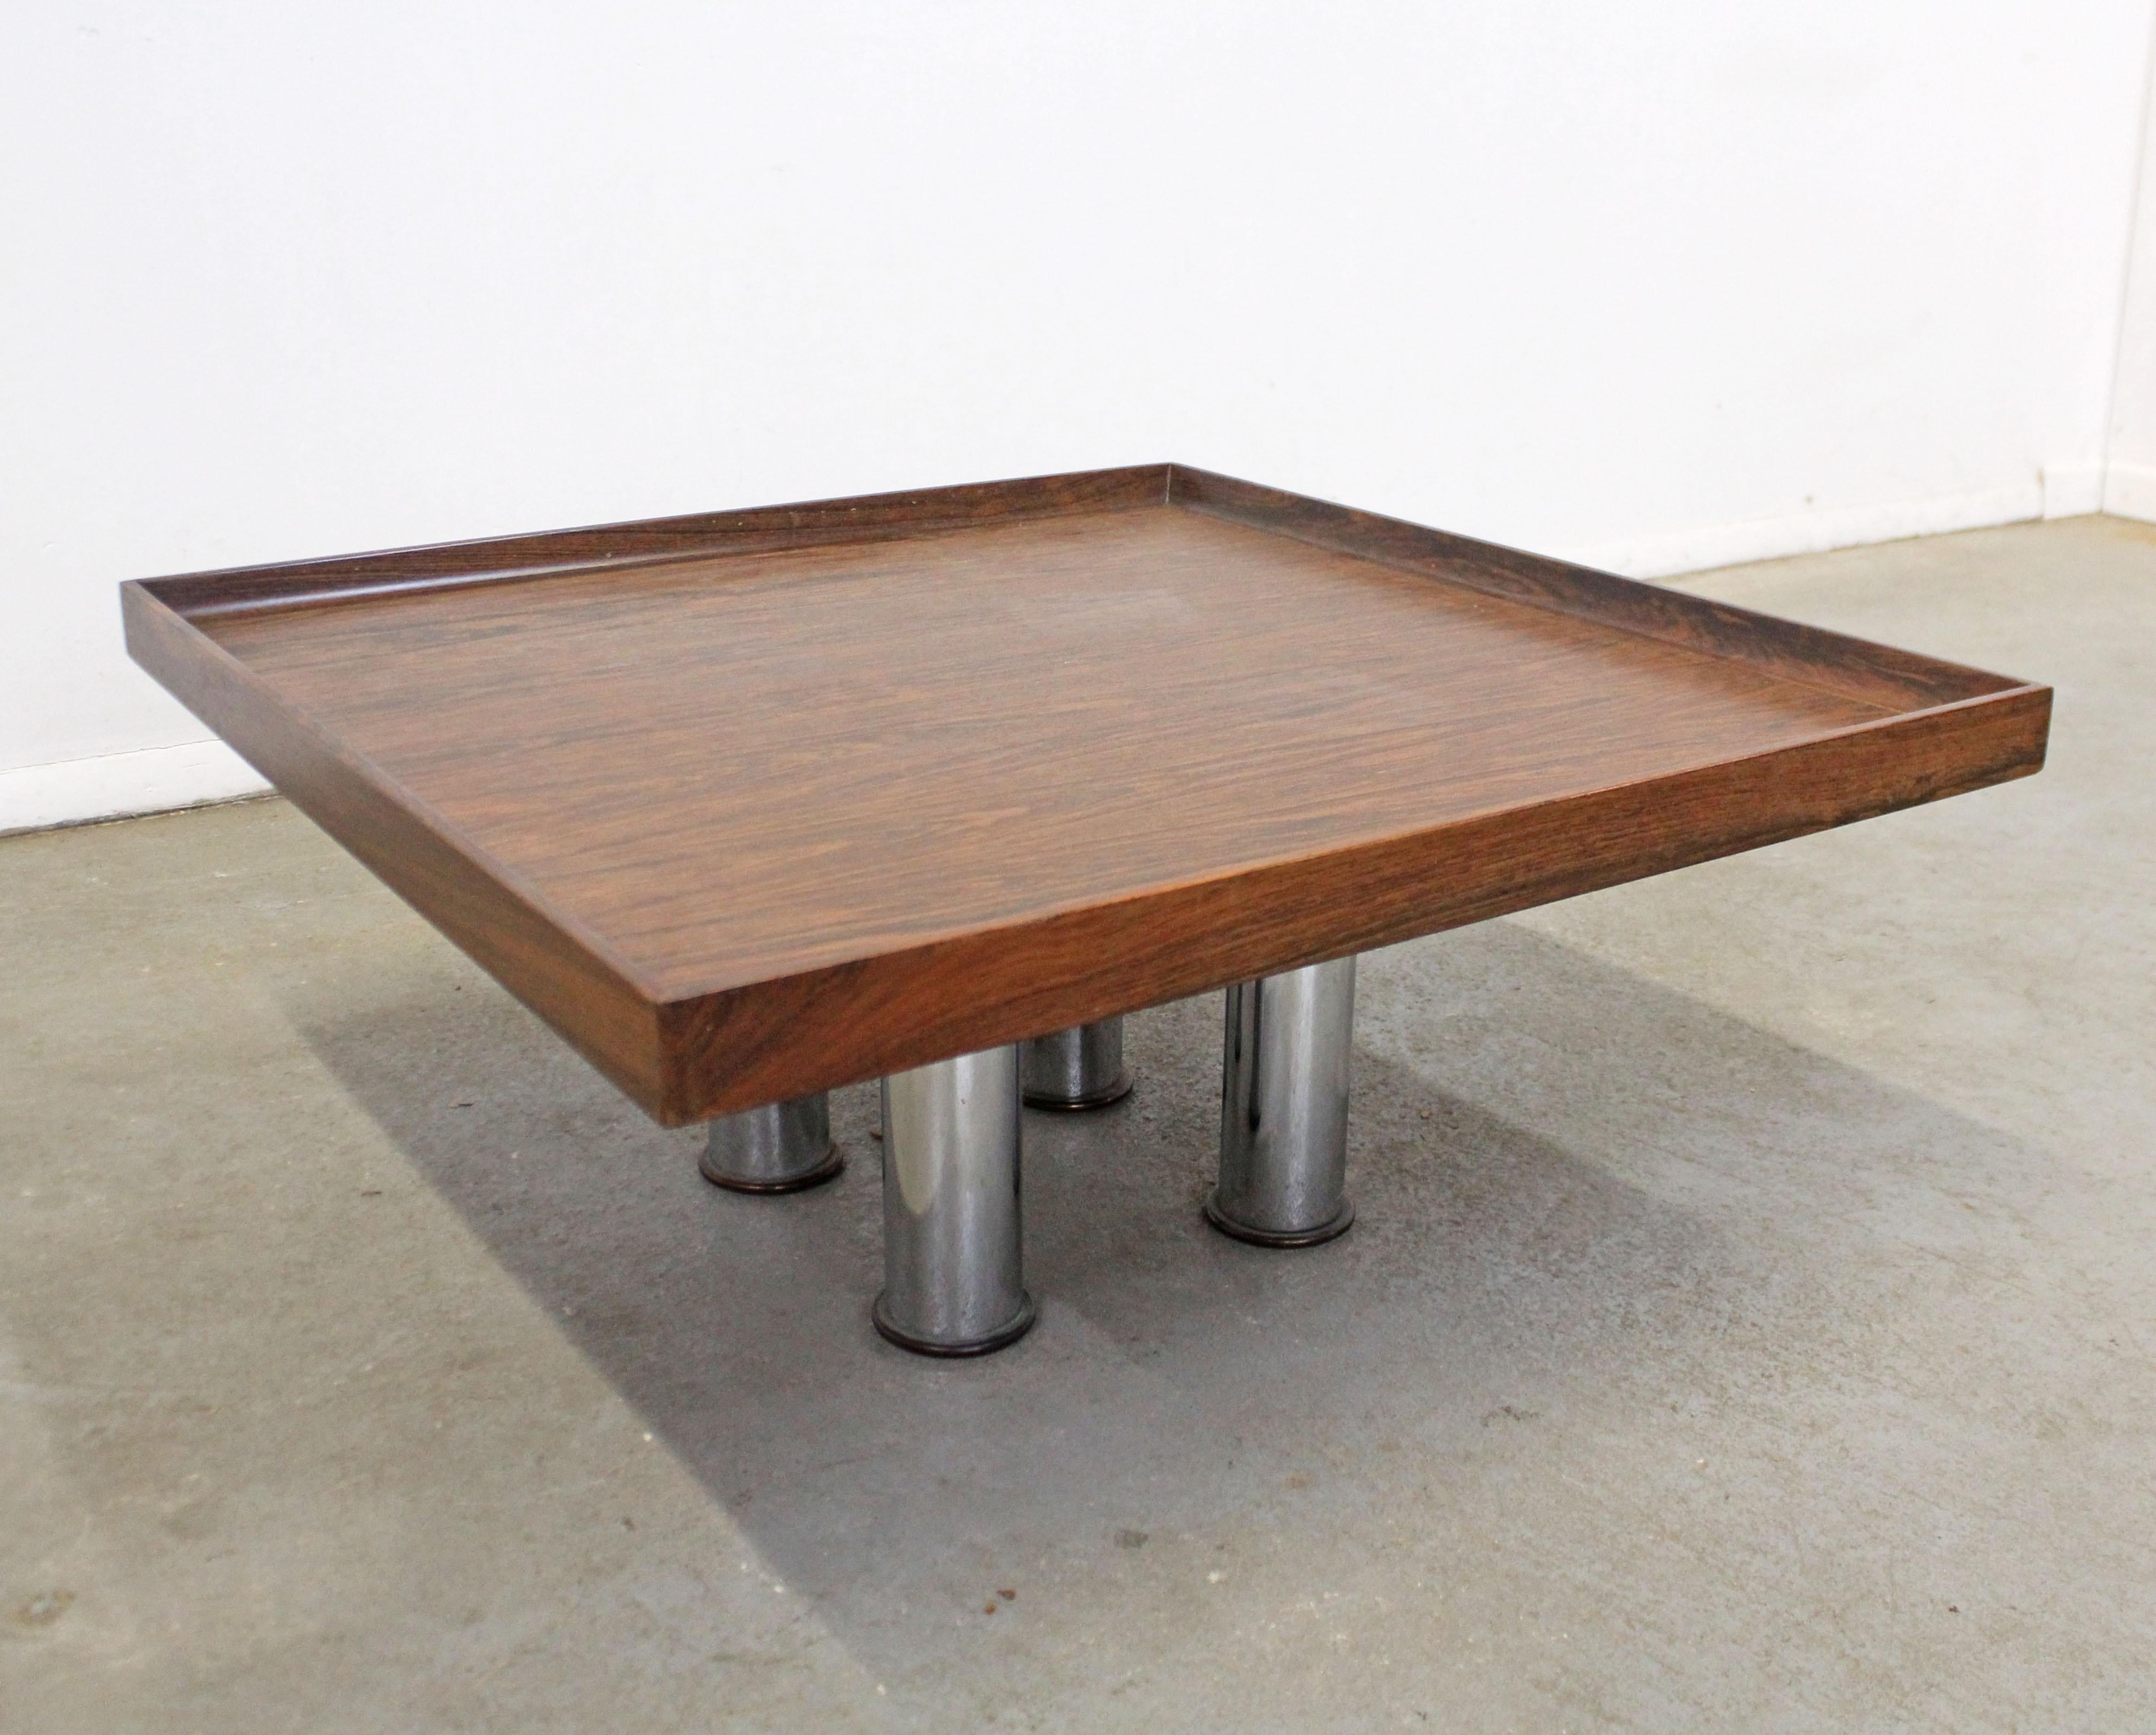 Offered is a Mid-Century Modern rosewood coffee/end table attributed to Knoll. Features a square top and four chrome legs. In good condition, shows some slight wear (patina on chrome, minor surface wear-see photos). It is unsigned. A great piece to